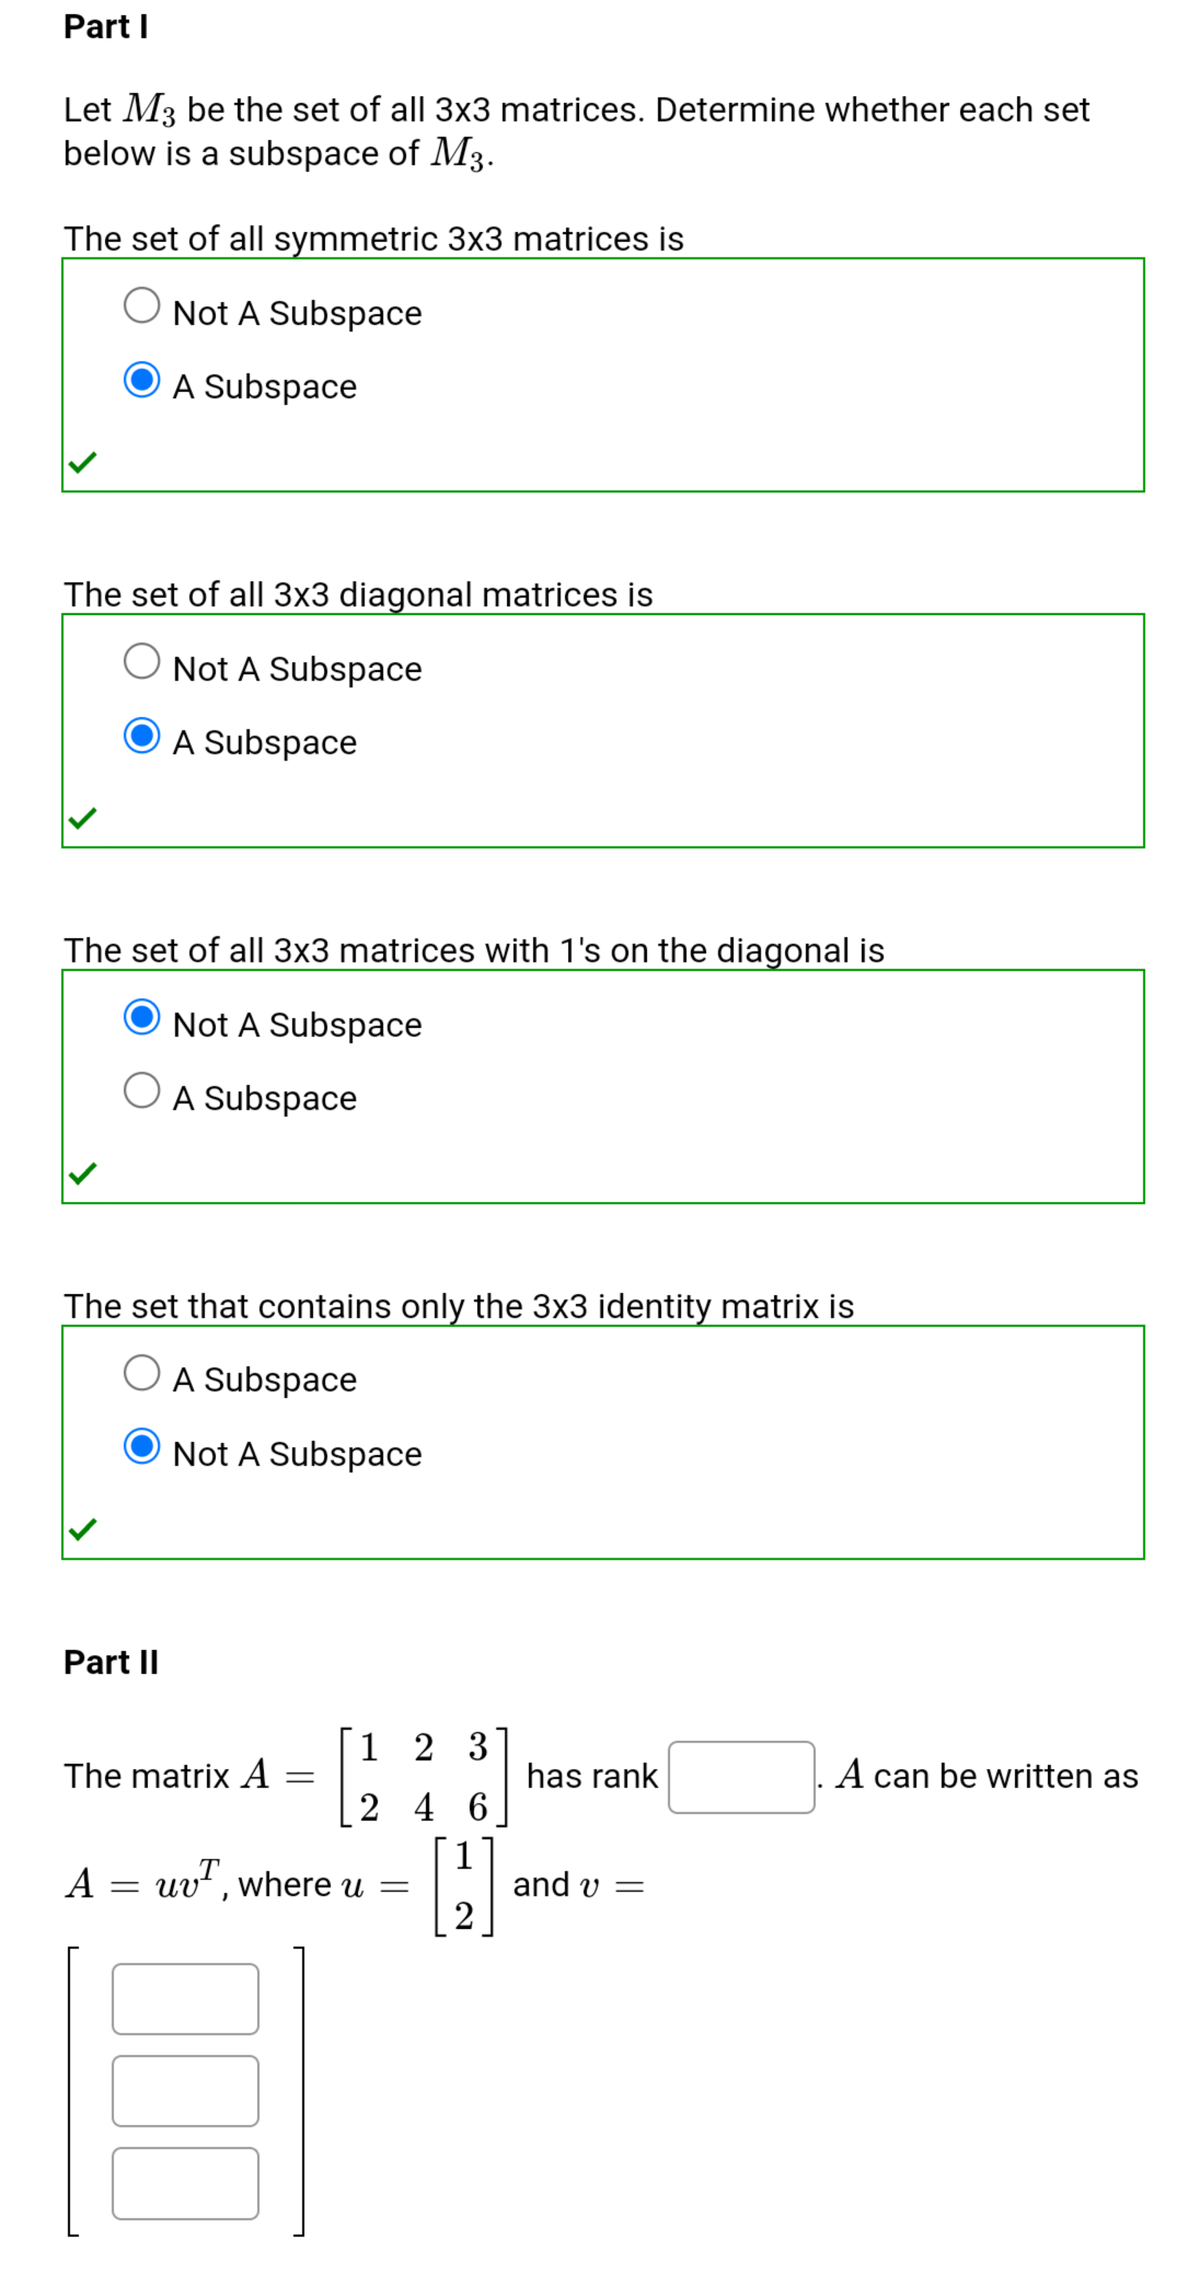 Part I
Let M3 be the set of all 3x3 matrices. Determine whether each set
below is a subspace of M3.
The set of all symmetric 3x3 matrices is
Not A Subspace
A Subspace
The set of all 3x3 diagonal matrices is
Not A Subspace
A Subspace
The set of all 3x3 matrices with 1's on the diagonal is
Not A Subspace
A Subspace
The set that contains only the 3x3 identity matrix is
O A Subspace
Not A Subspace
Part II
1 2 3
The matrix A =
has rank
A can be written as
2 4 6
A = uv", where u
1
and v =
u =
